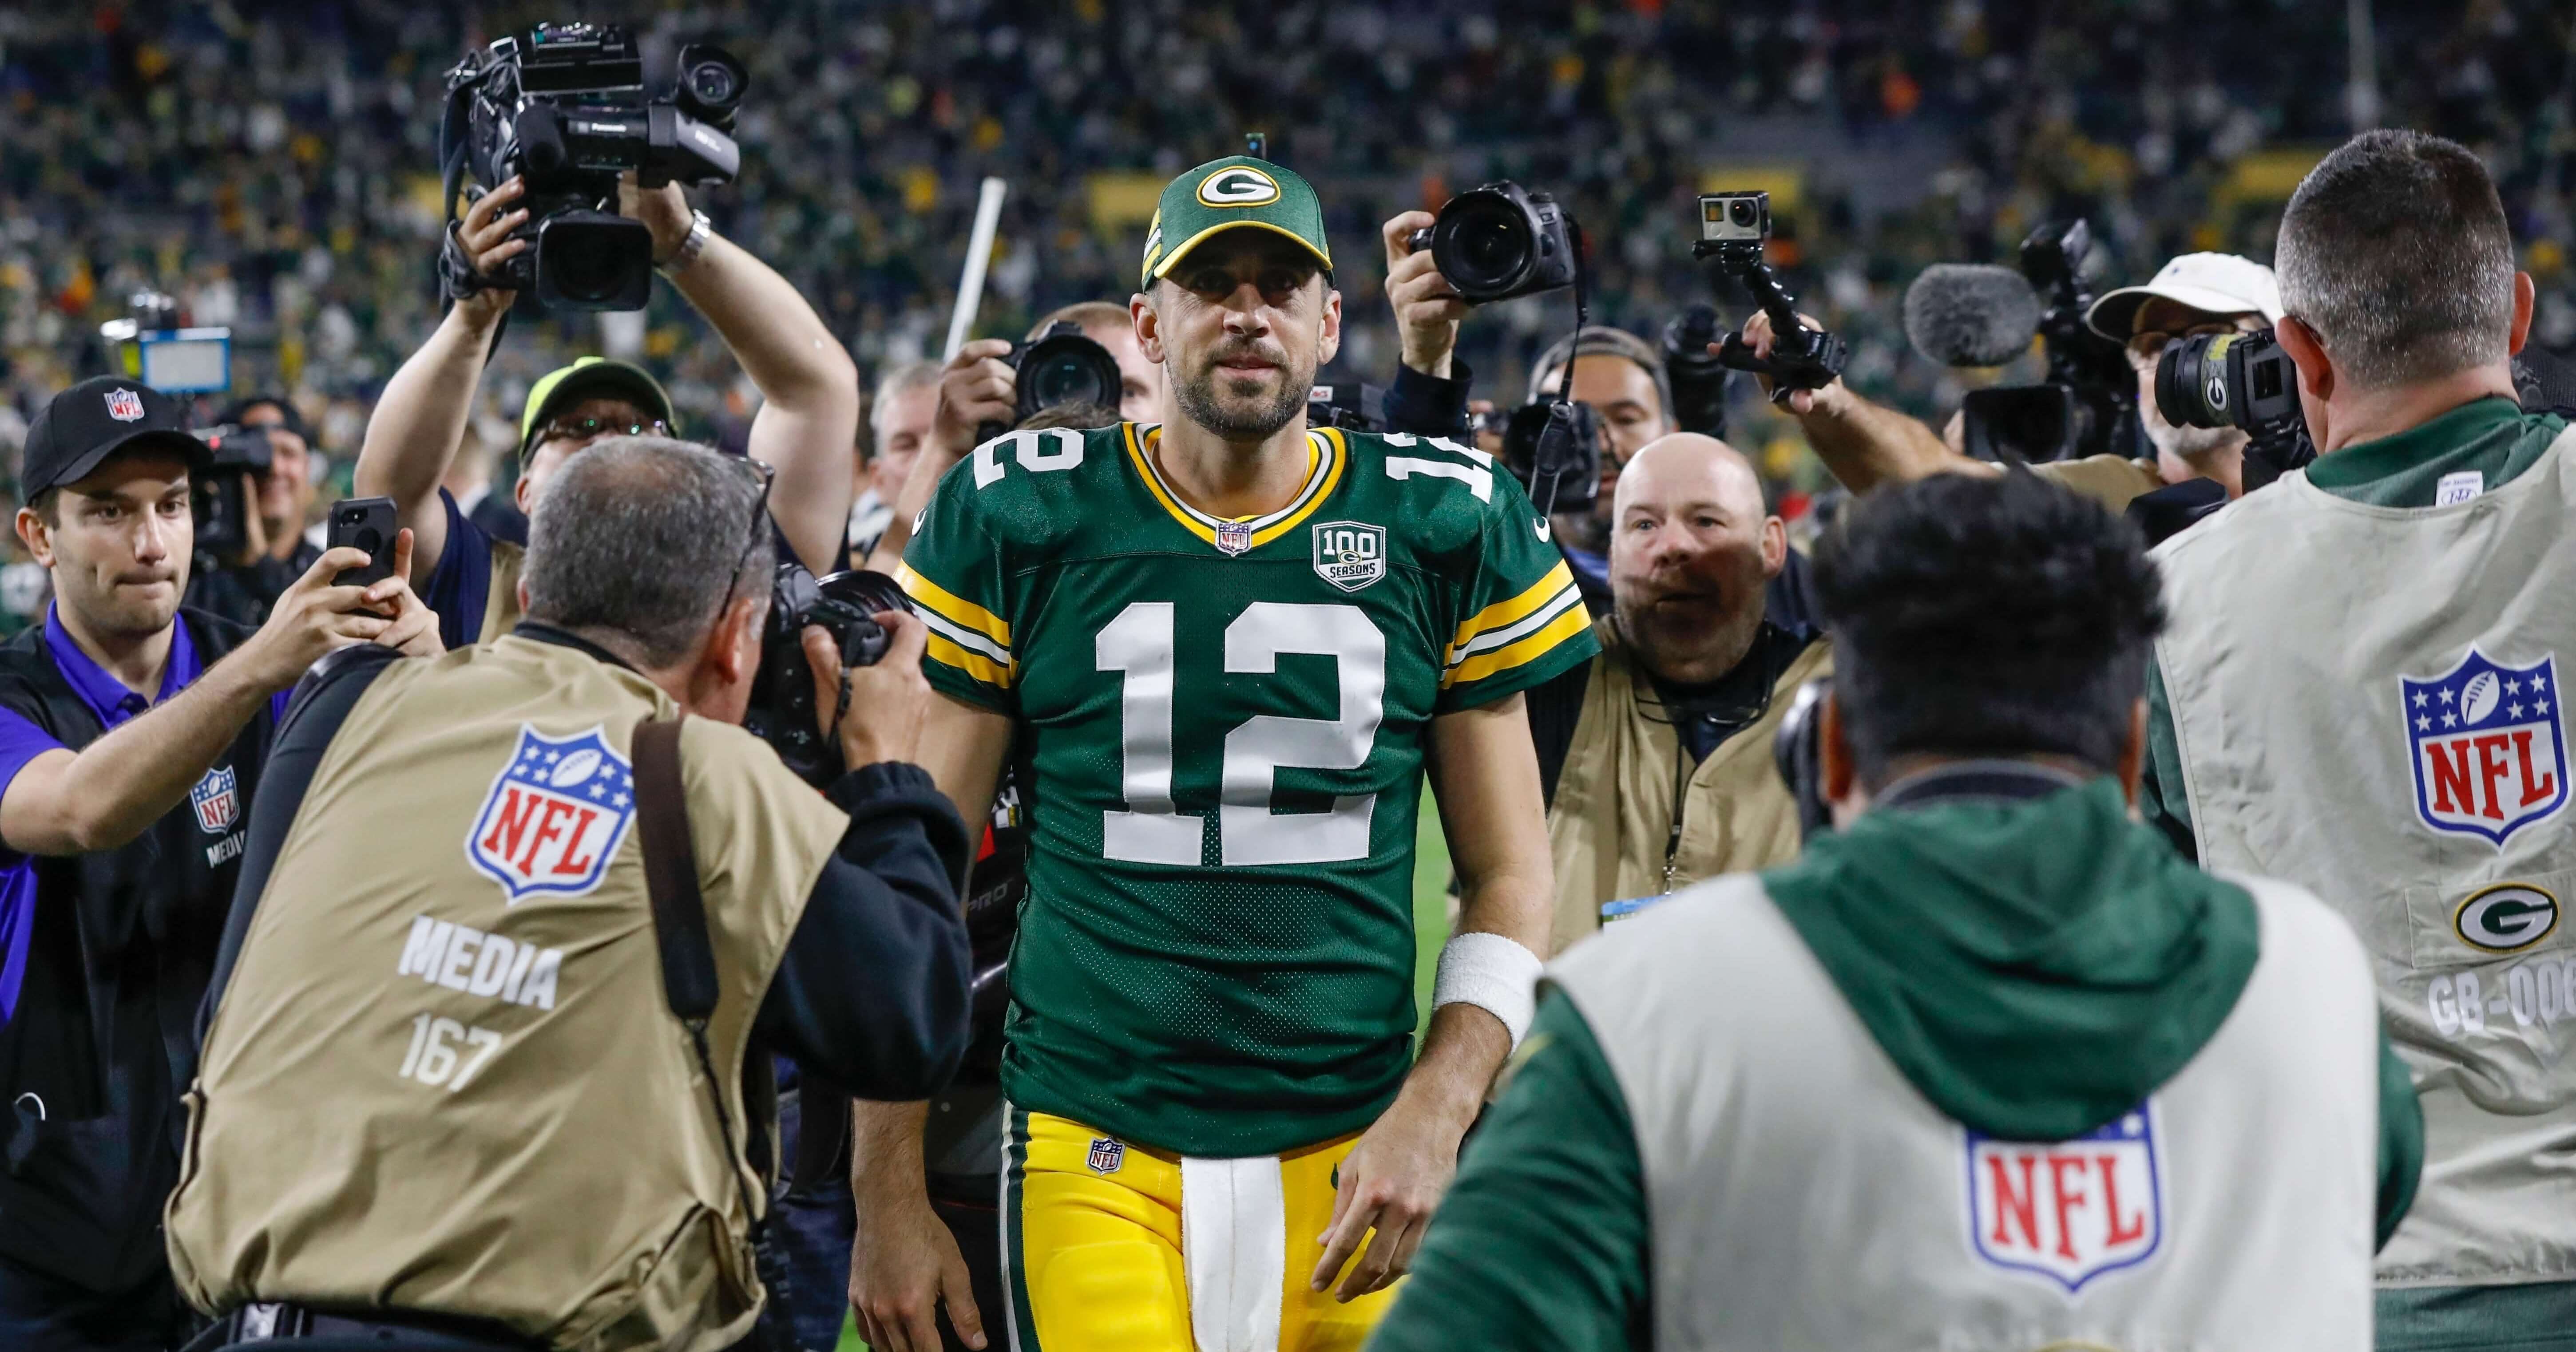 Green Bay Packers quarterback Aaron Rodgers walks off the field after leading his team to a 24-23 comeback victory at Lambeau Field